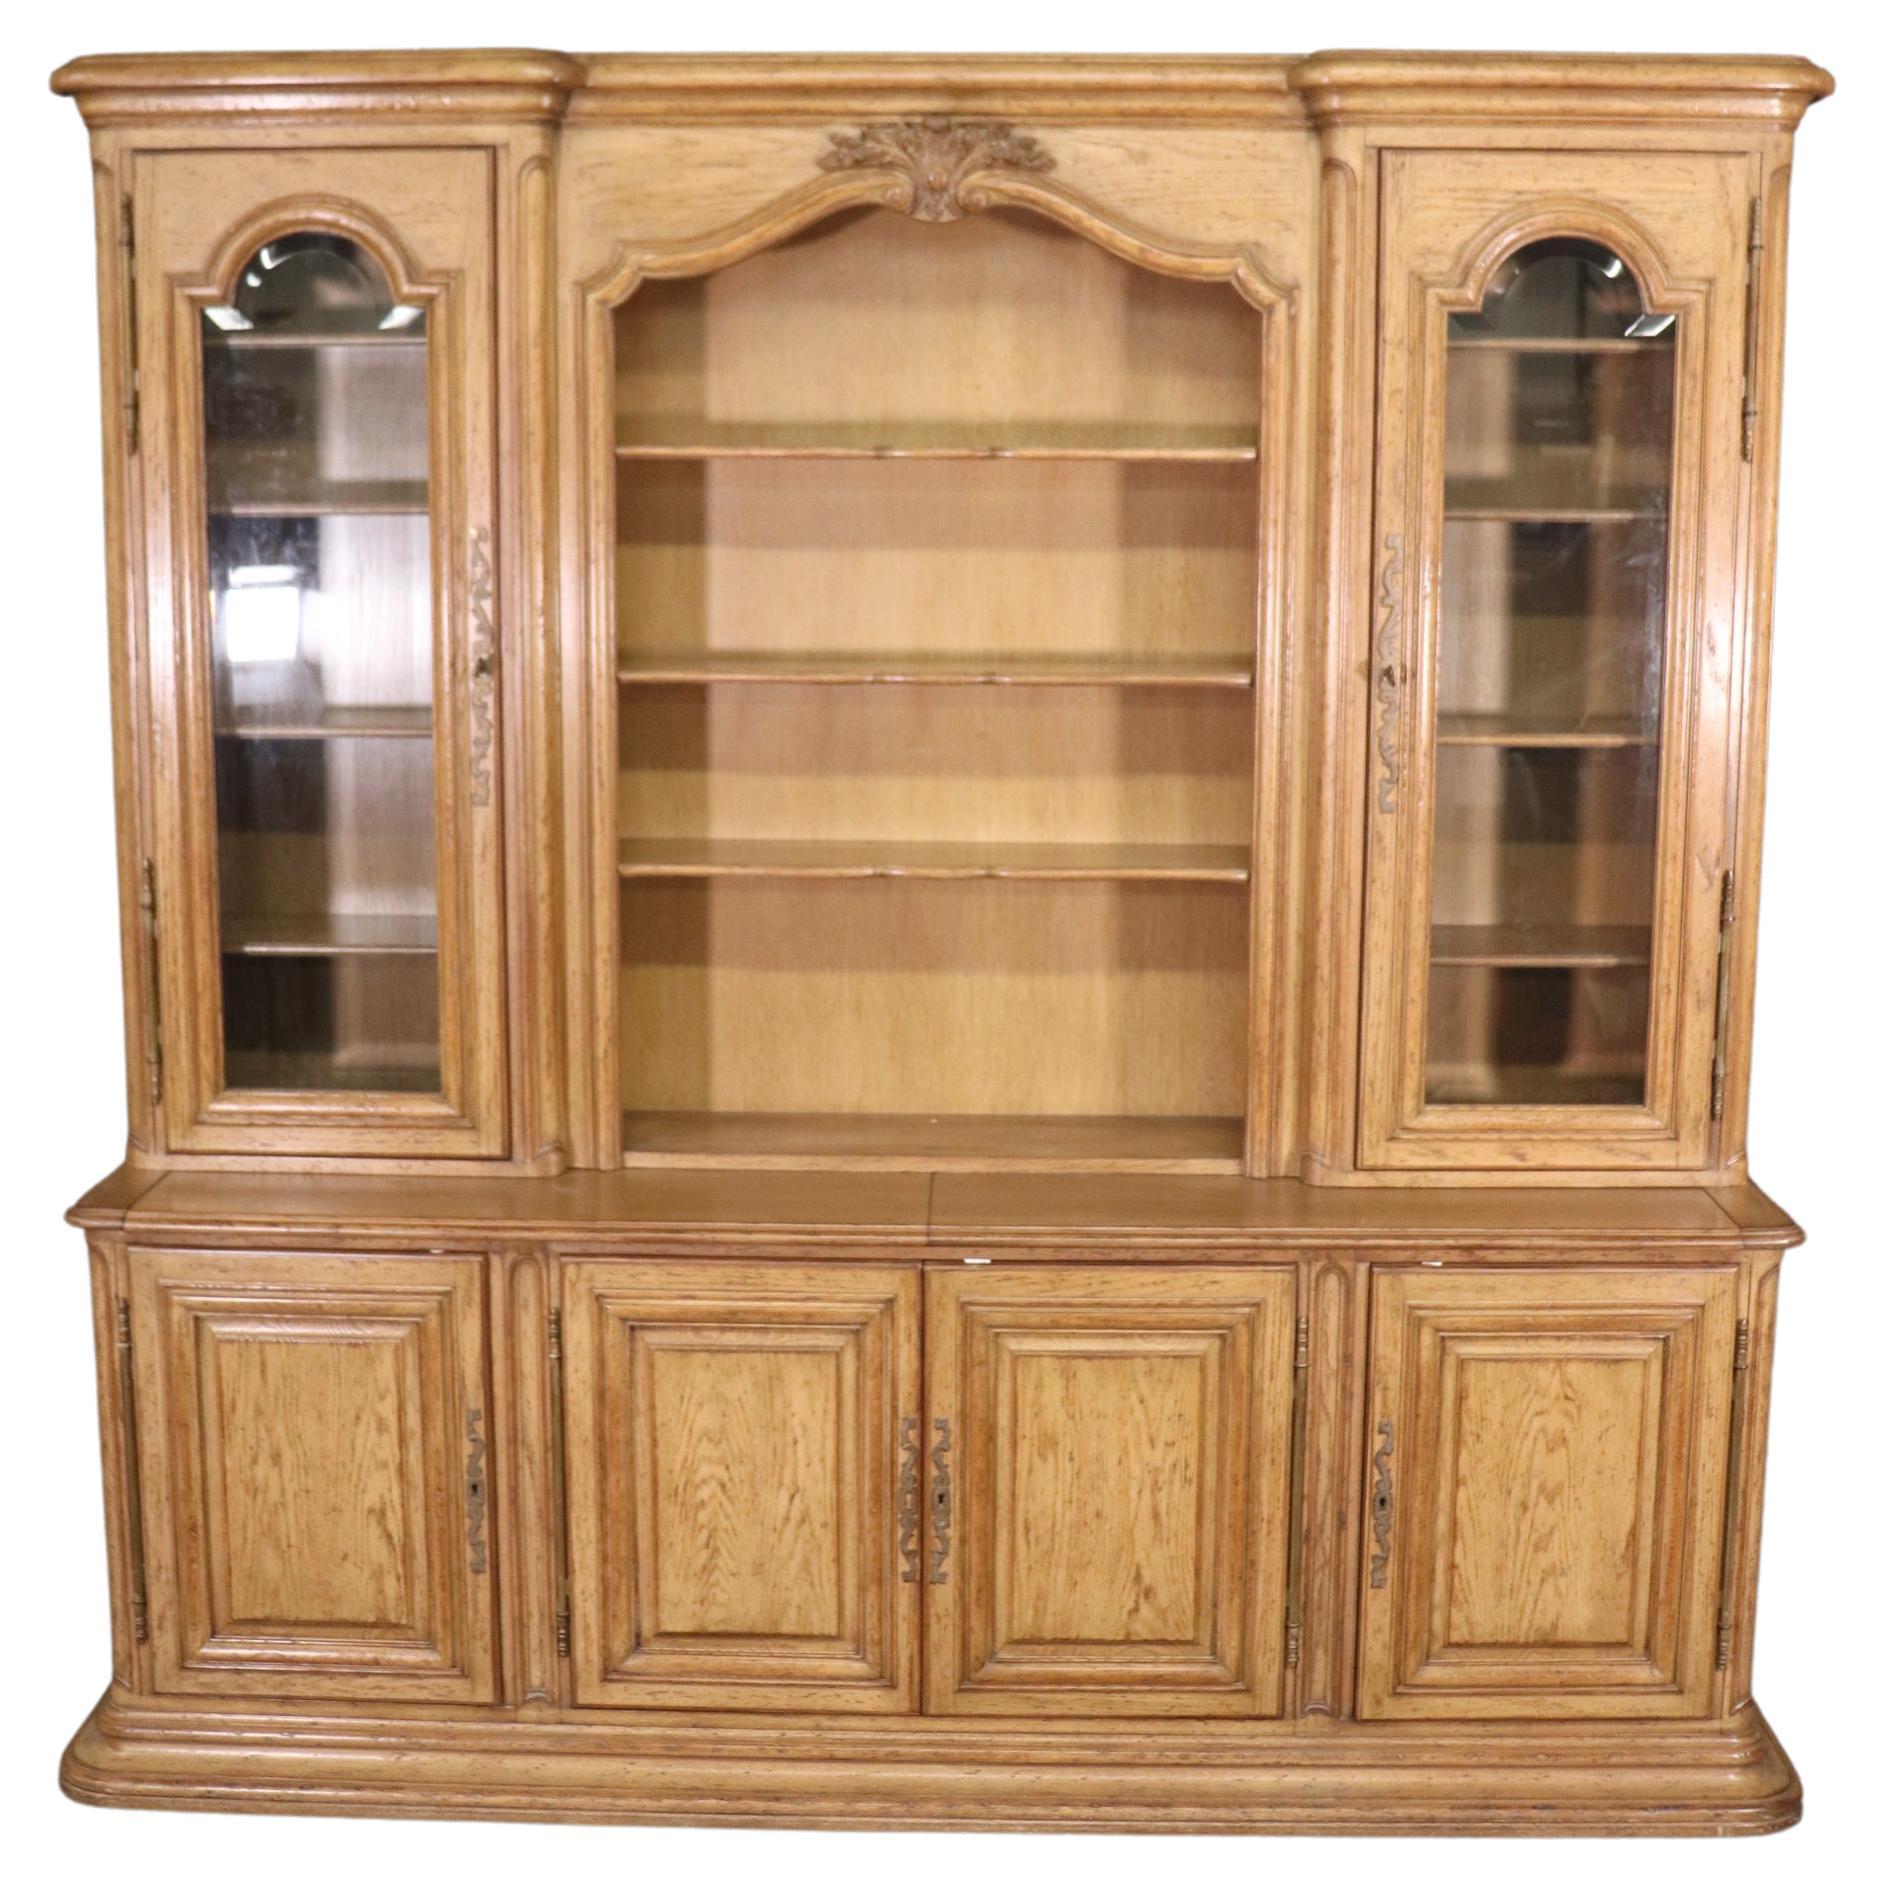 Auffray & Co French Provincial Antique Distressed Style Bookcase China Cabinet 